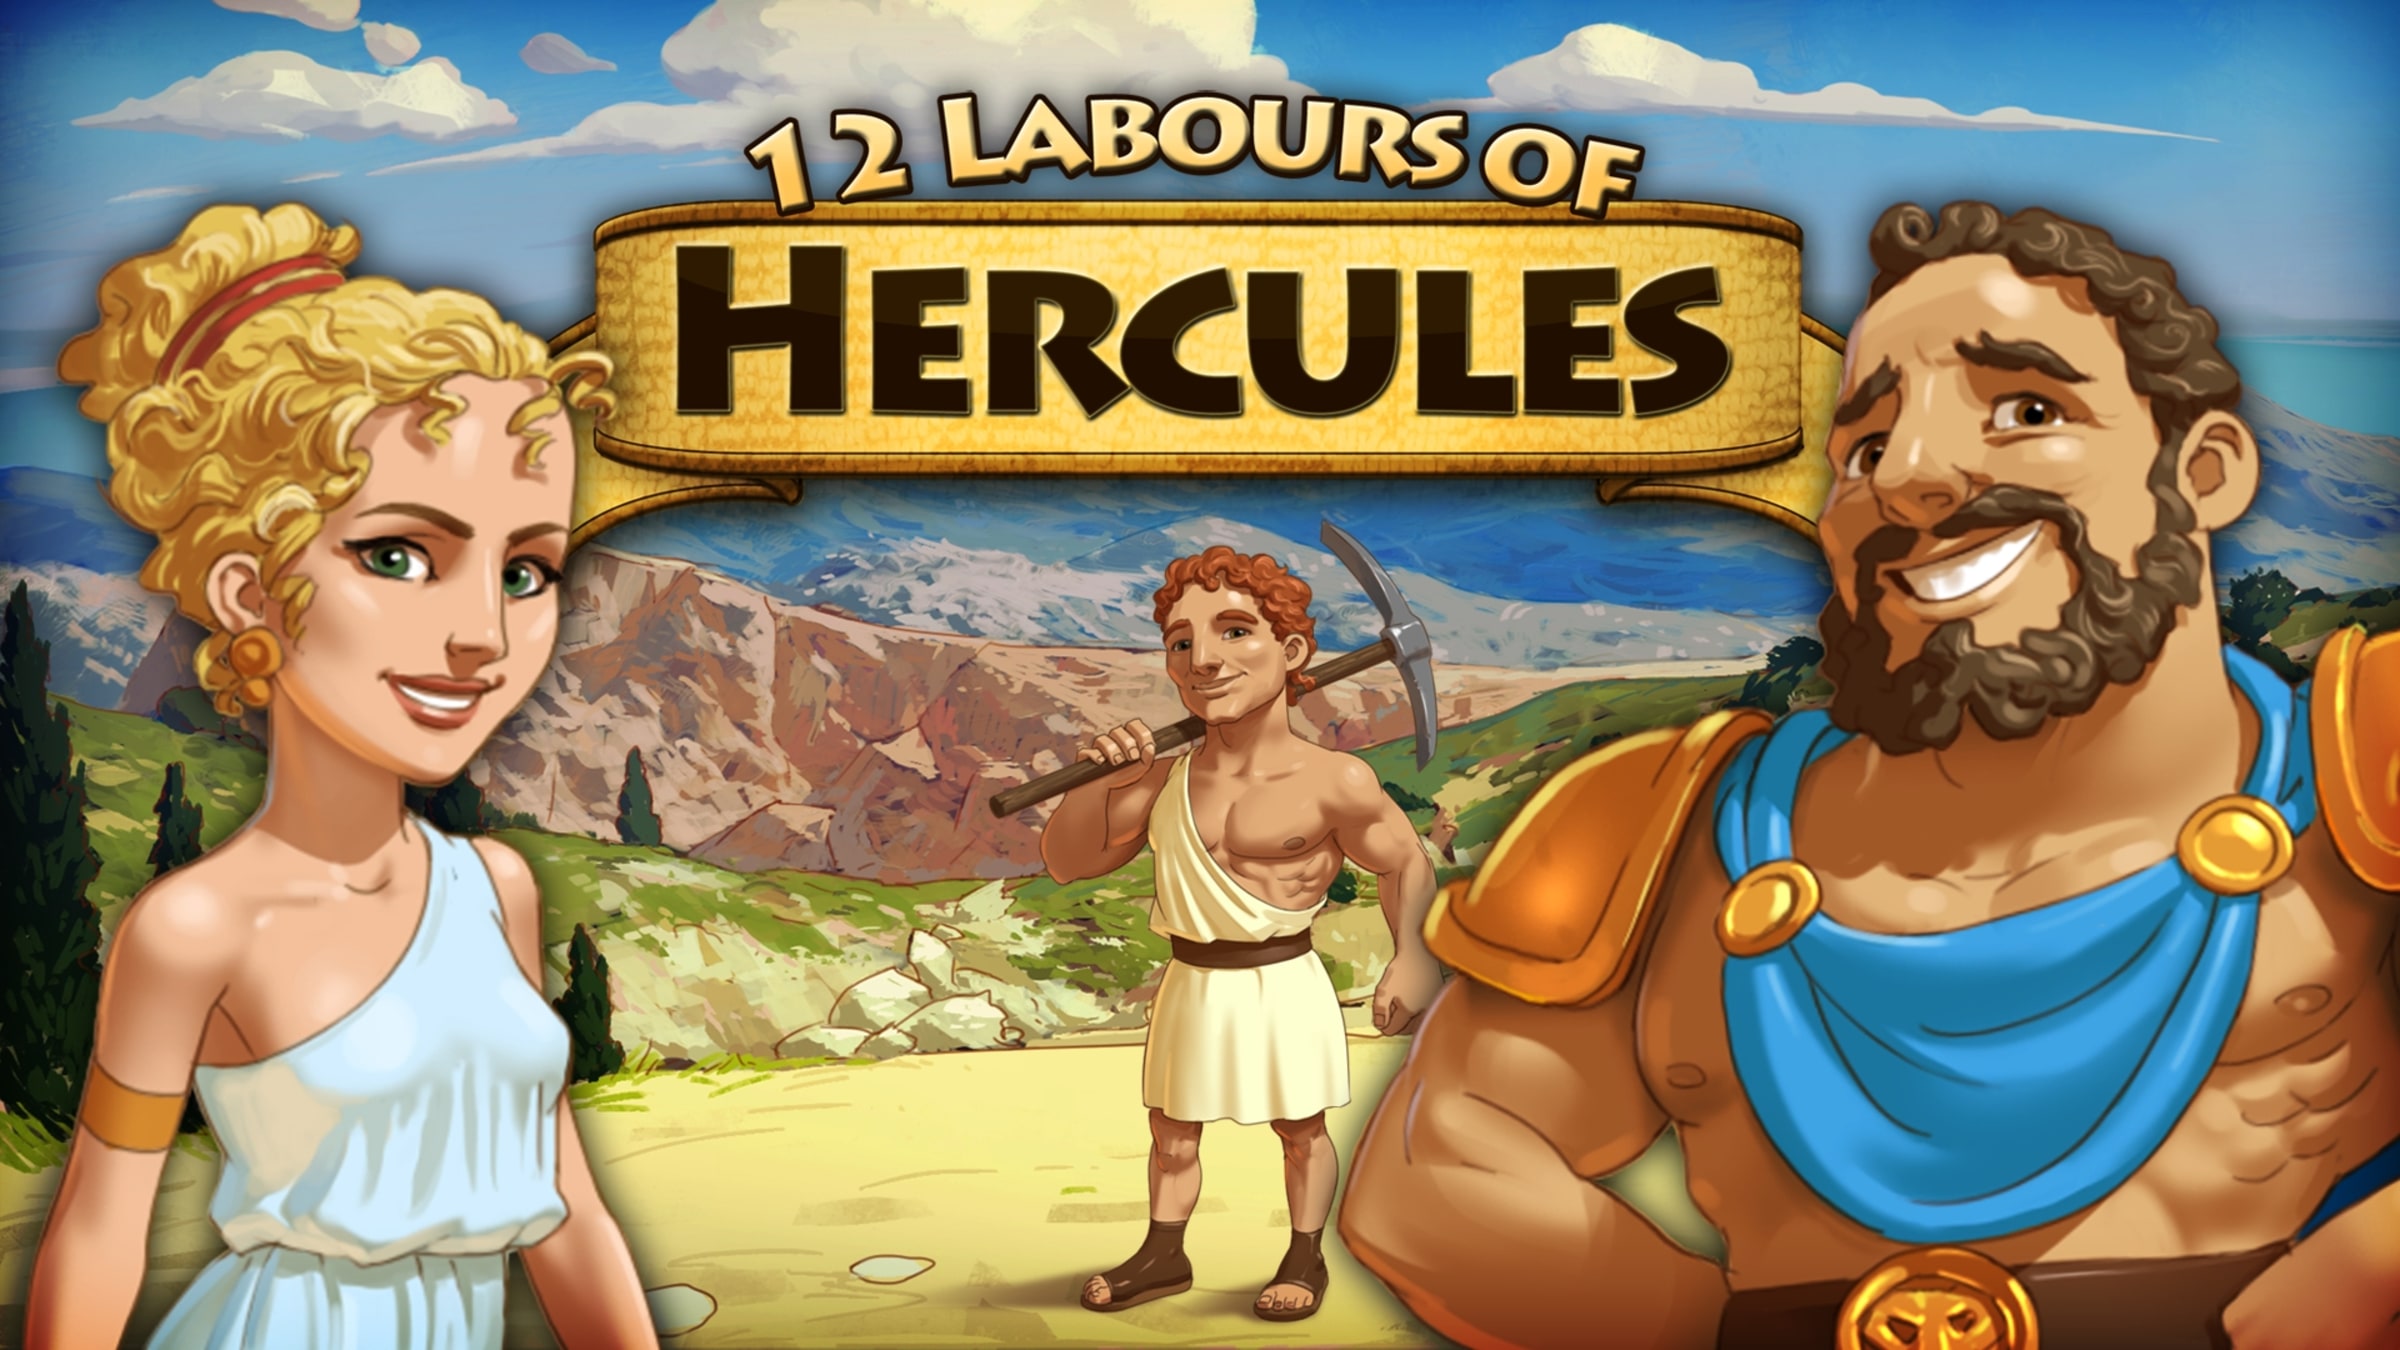 Official　for　12　Nintendo　Nintendo　Switch　Labours　Hercules　of　Site